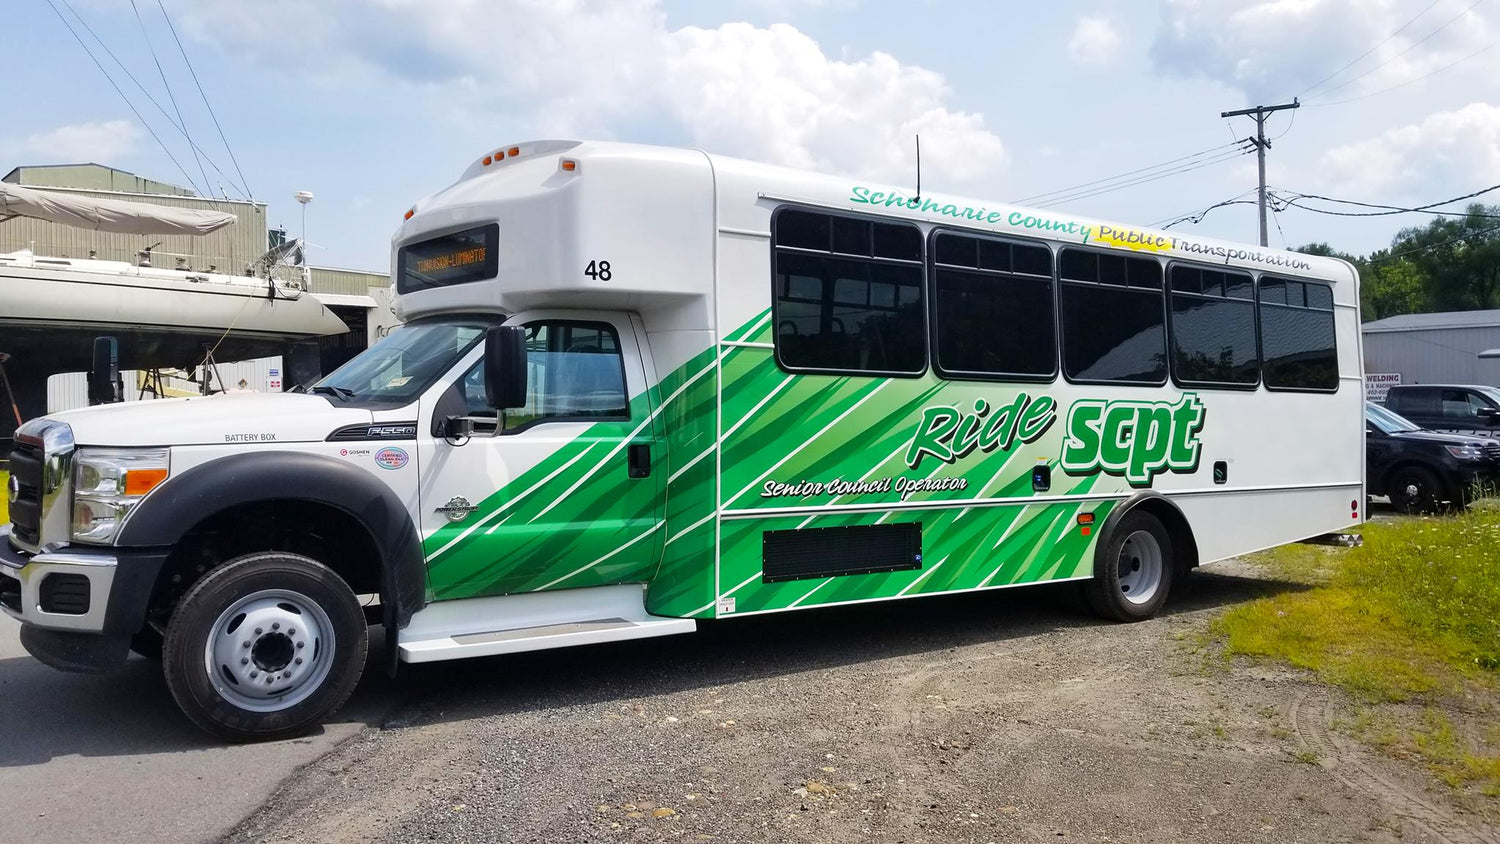 Partial vinyl vehicle wrap installed on bus by the capital region's leading supplier of vinyl wraps, All Signs & Graphics Inc. Printed and laminated premium cast vinyl graphics were used in this layout.